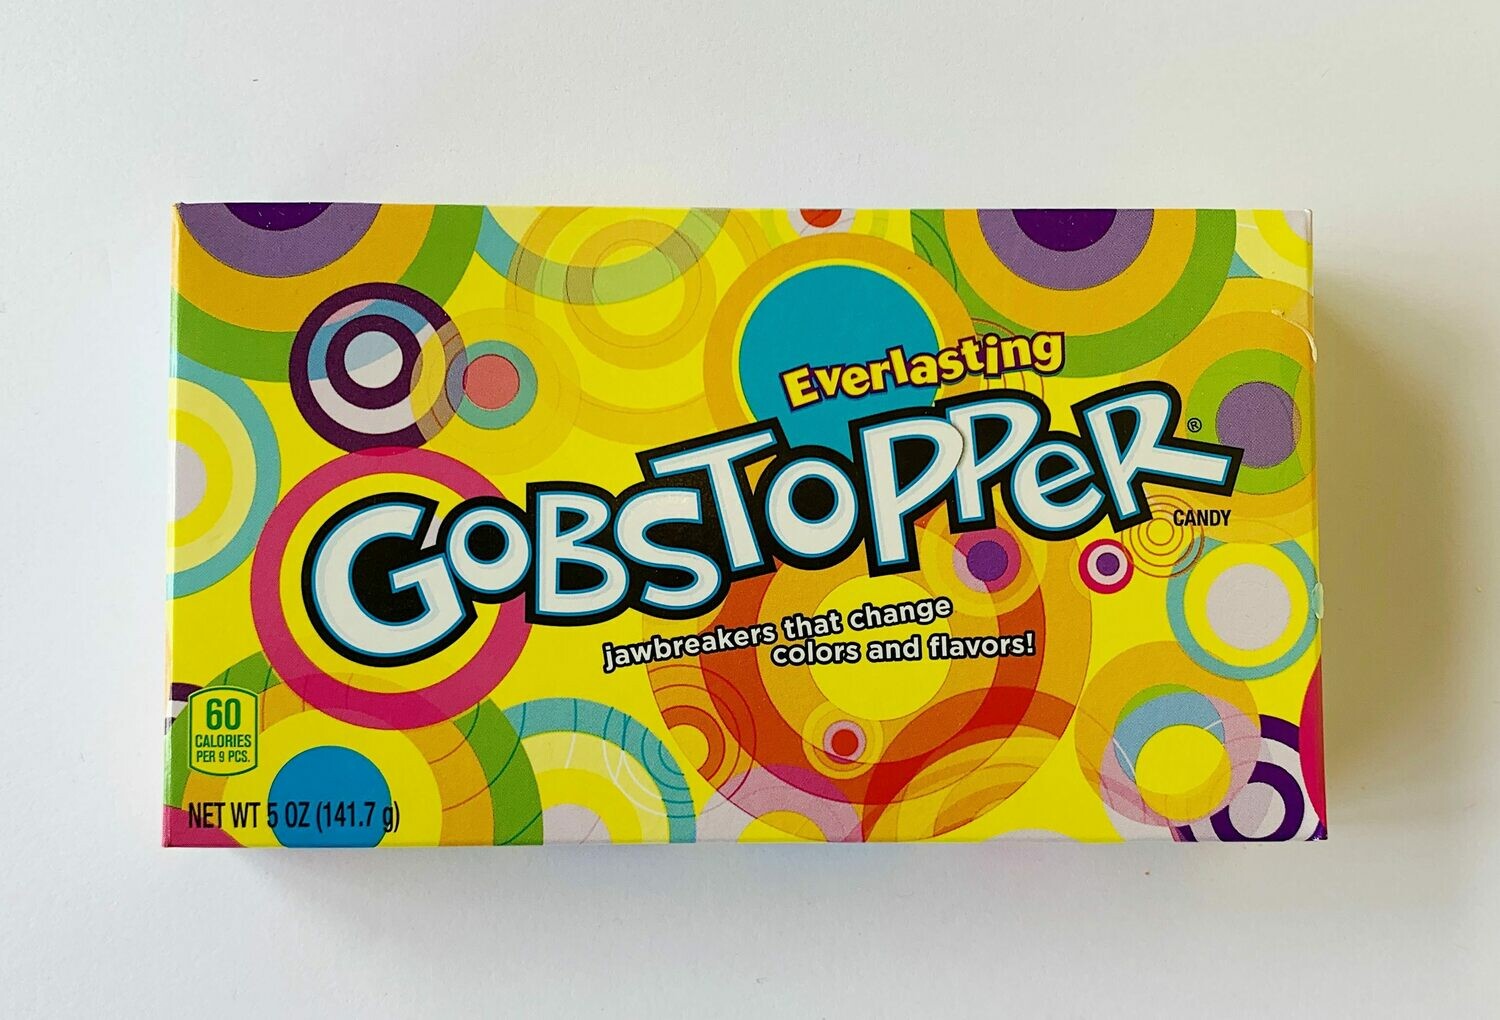 Gobstopper Theater Box